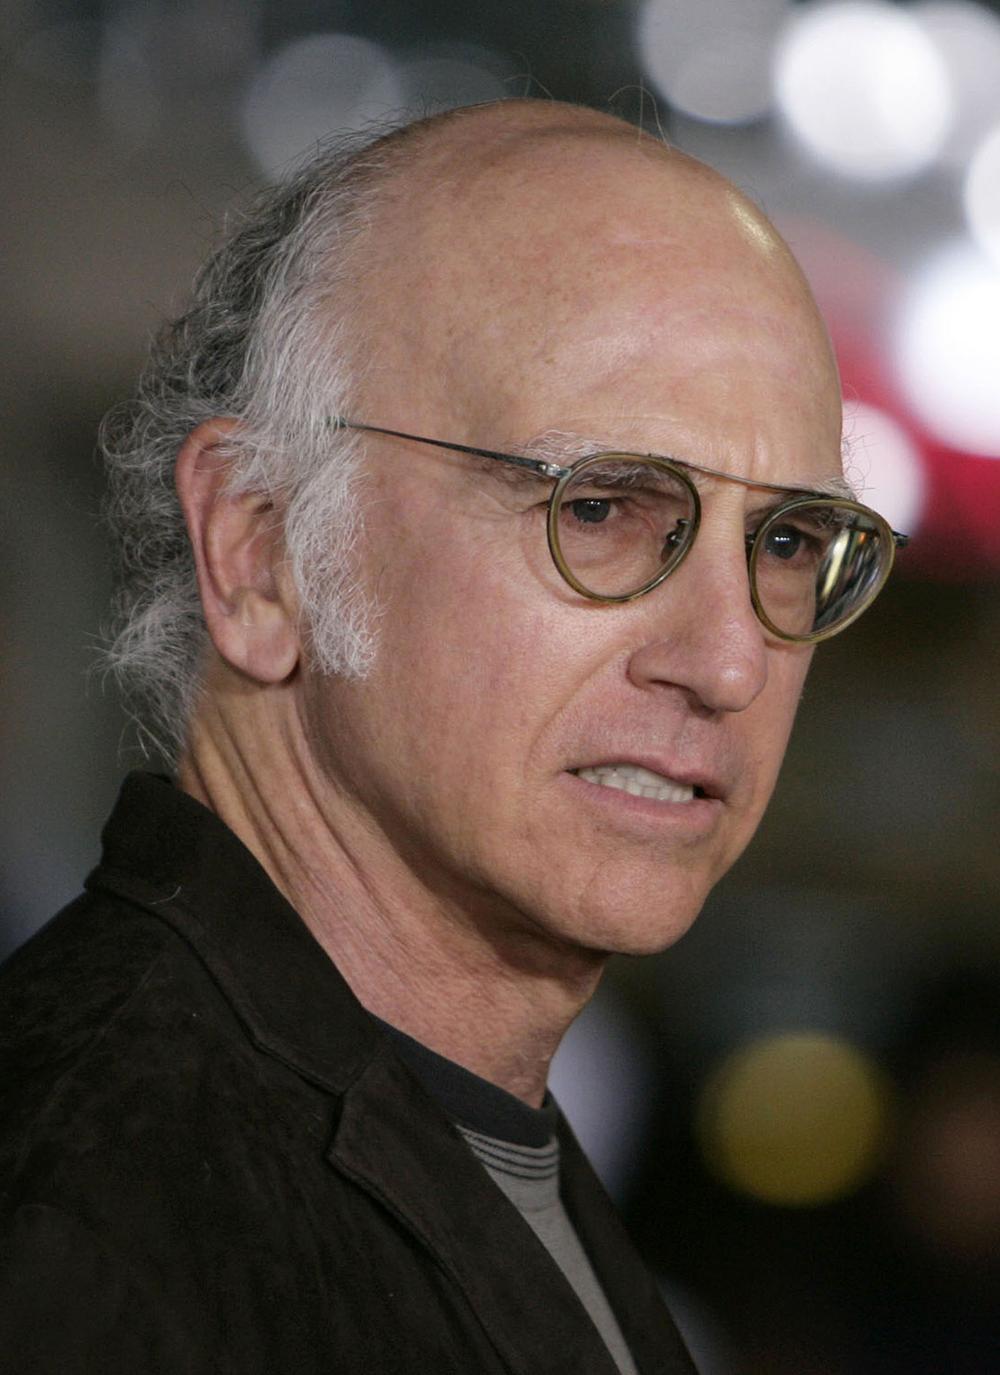 ** FILE ** Larry David arrives at the premiere of &quot;The Heartbreak Kid&quot; in Los Angeles on in this Sept. 27, 2007, file photo. David's &quot;Curb Your Enthusiasm&quot; episode which aired, Sunday, Oct. 21, 2007, was a classic case of art imitating life. On the show, David's fictional spouse, played by Cheryl Hines, left him, an obvious mirror to David's real-life divorce.  (AP Photo/Matt Sayles, file)